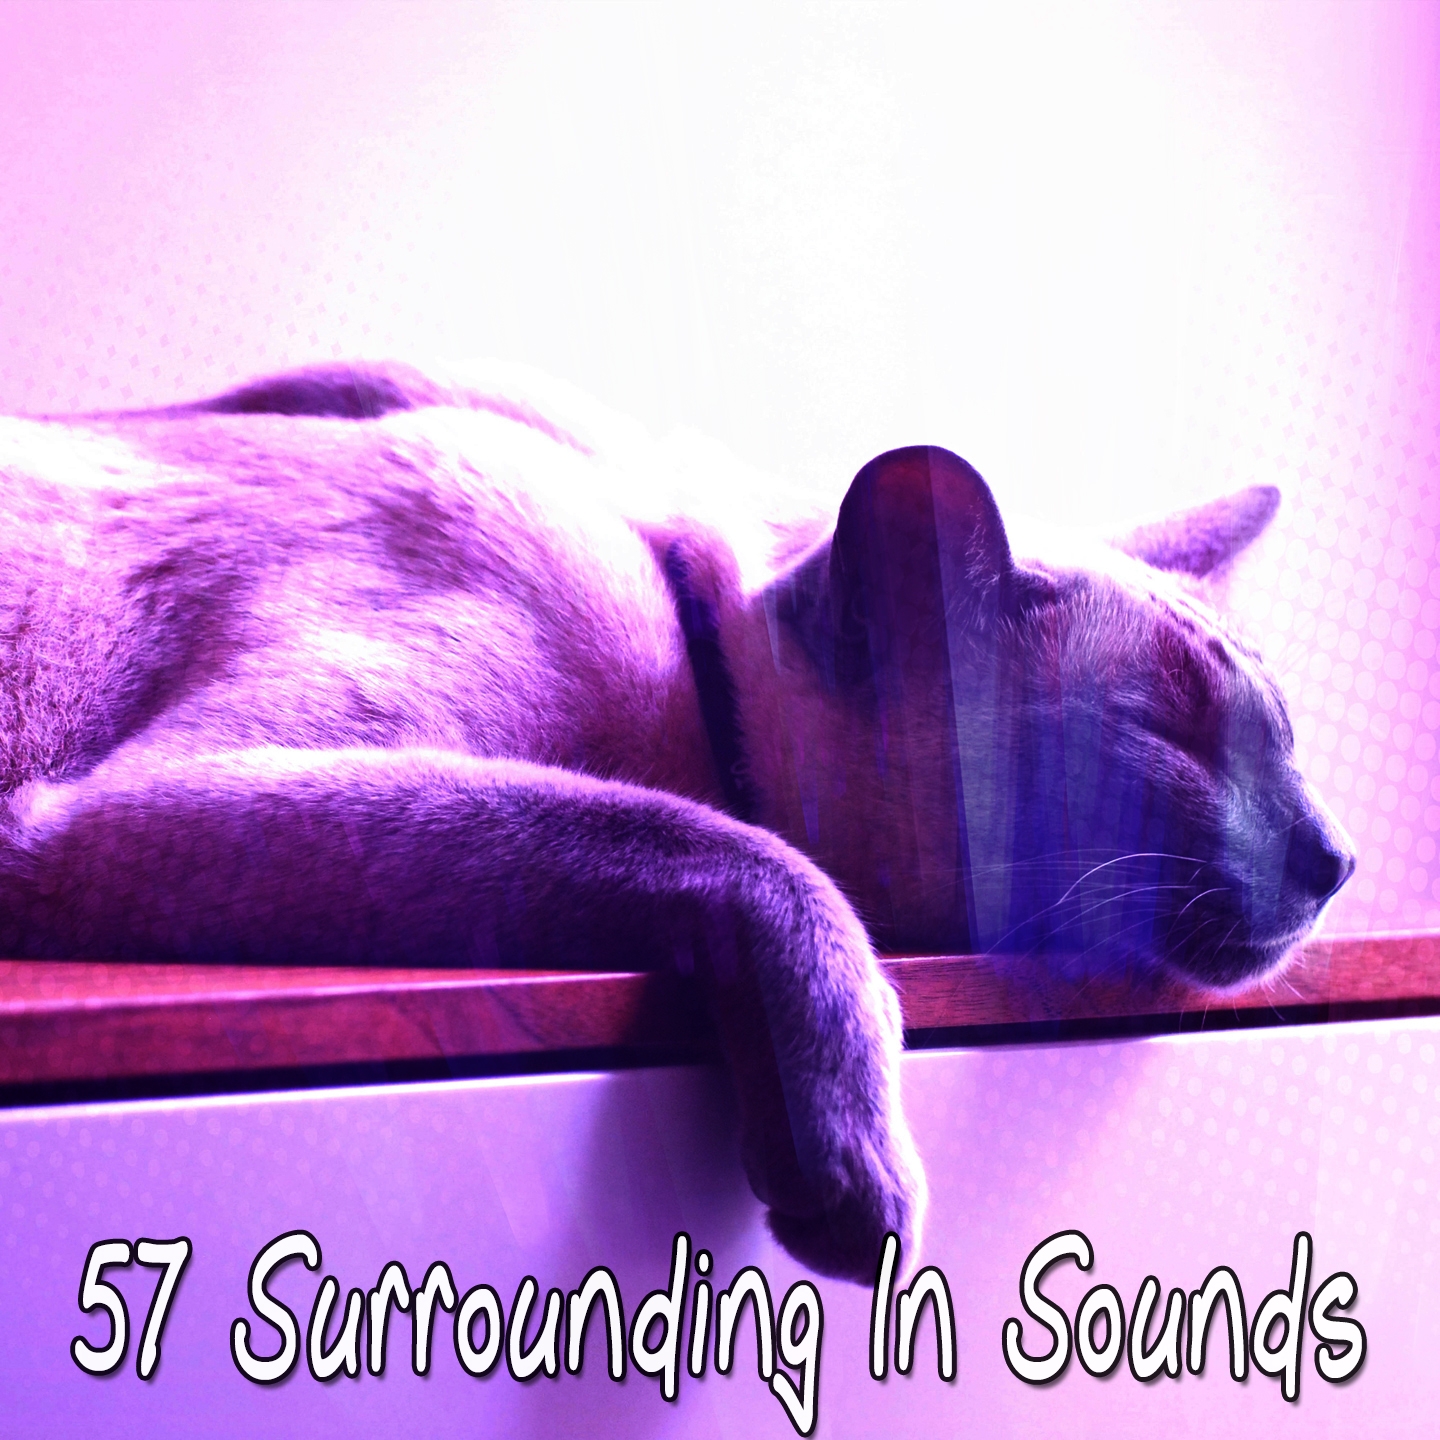 57 Surrounding In Sounds